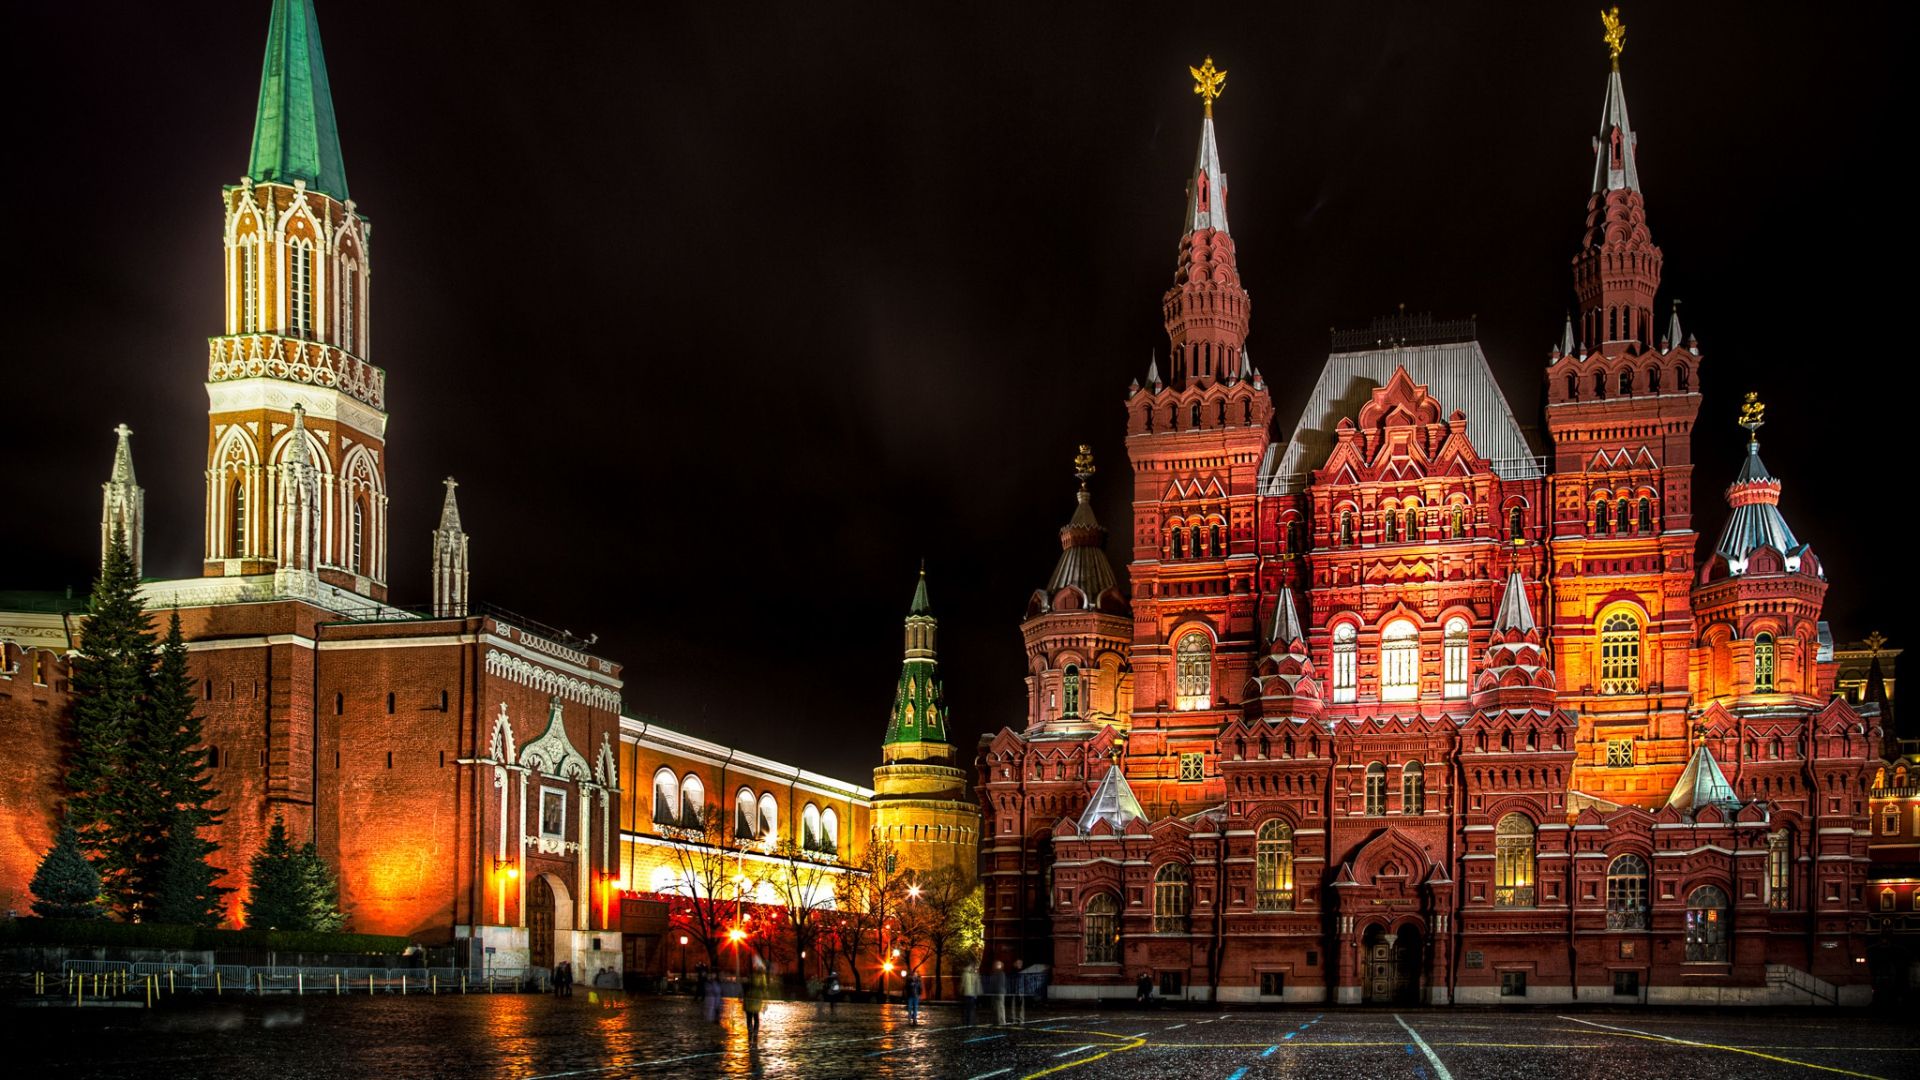 Download 1920x1080 HD Wallpaper red square illumination moscow russia autumn night, Desktop Background HD